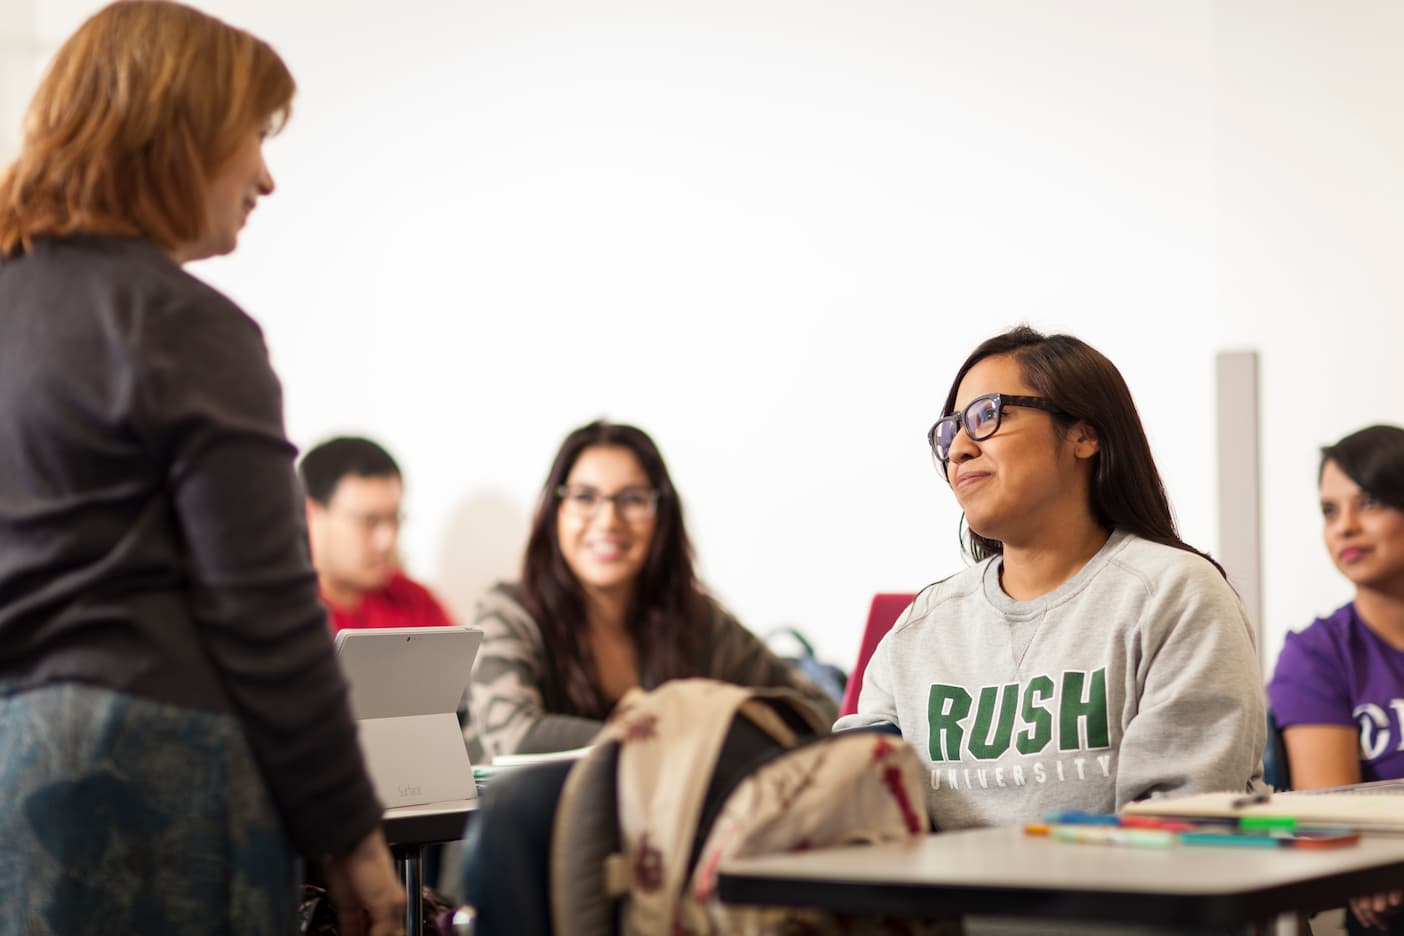 Student sits in class wearing a Rush shirt.